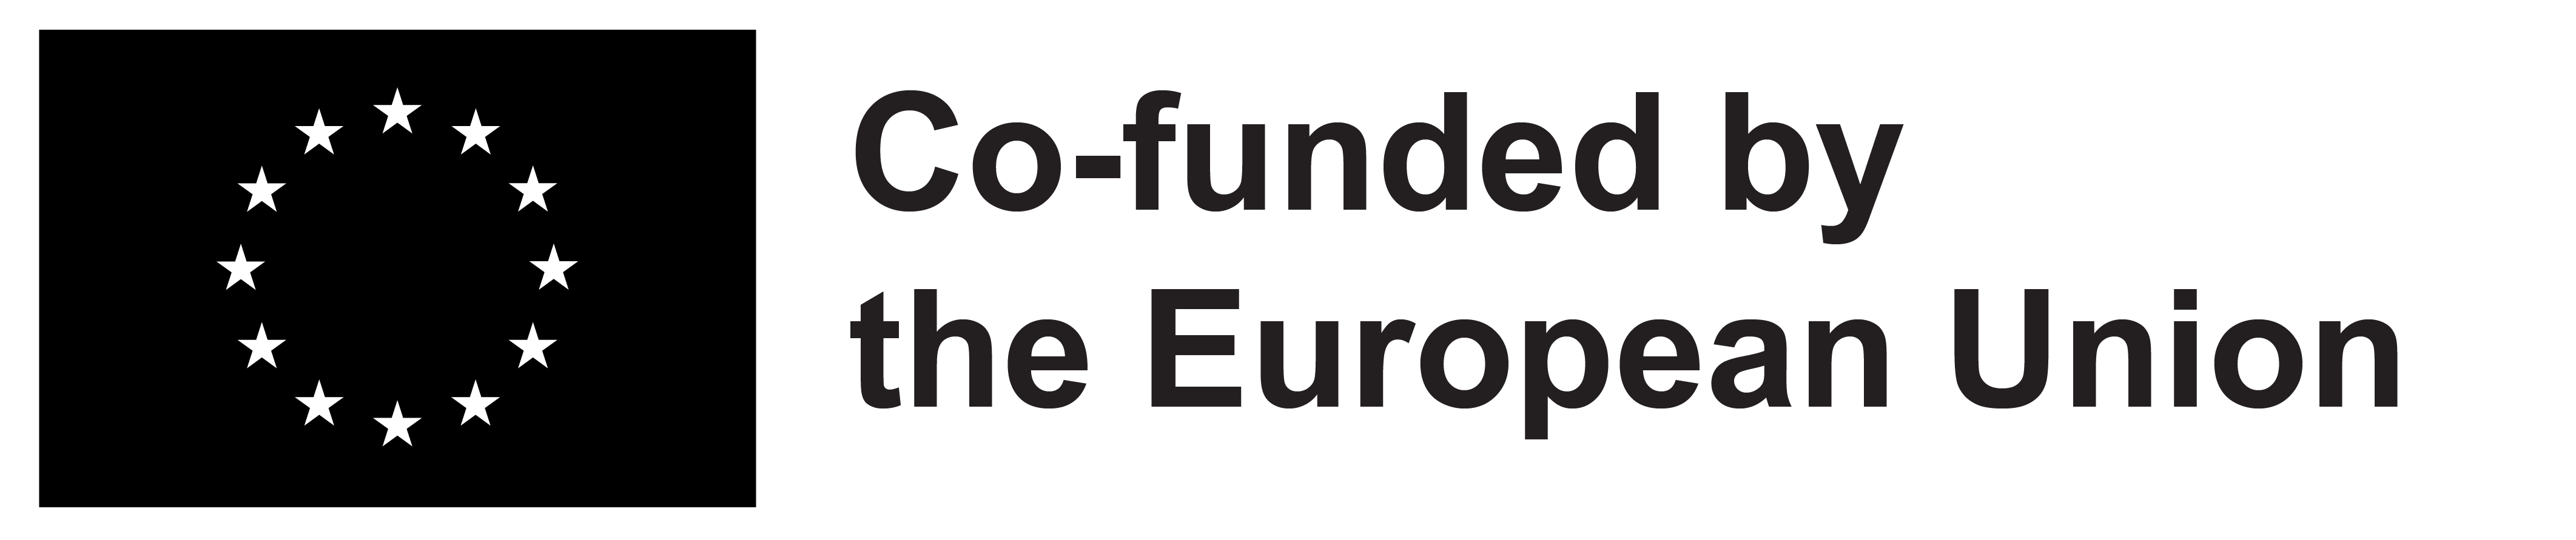 Co-funded by EU logo